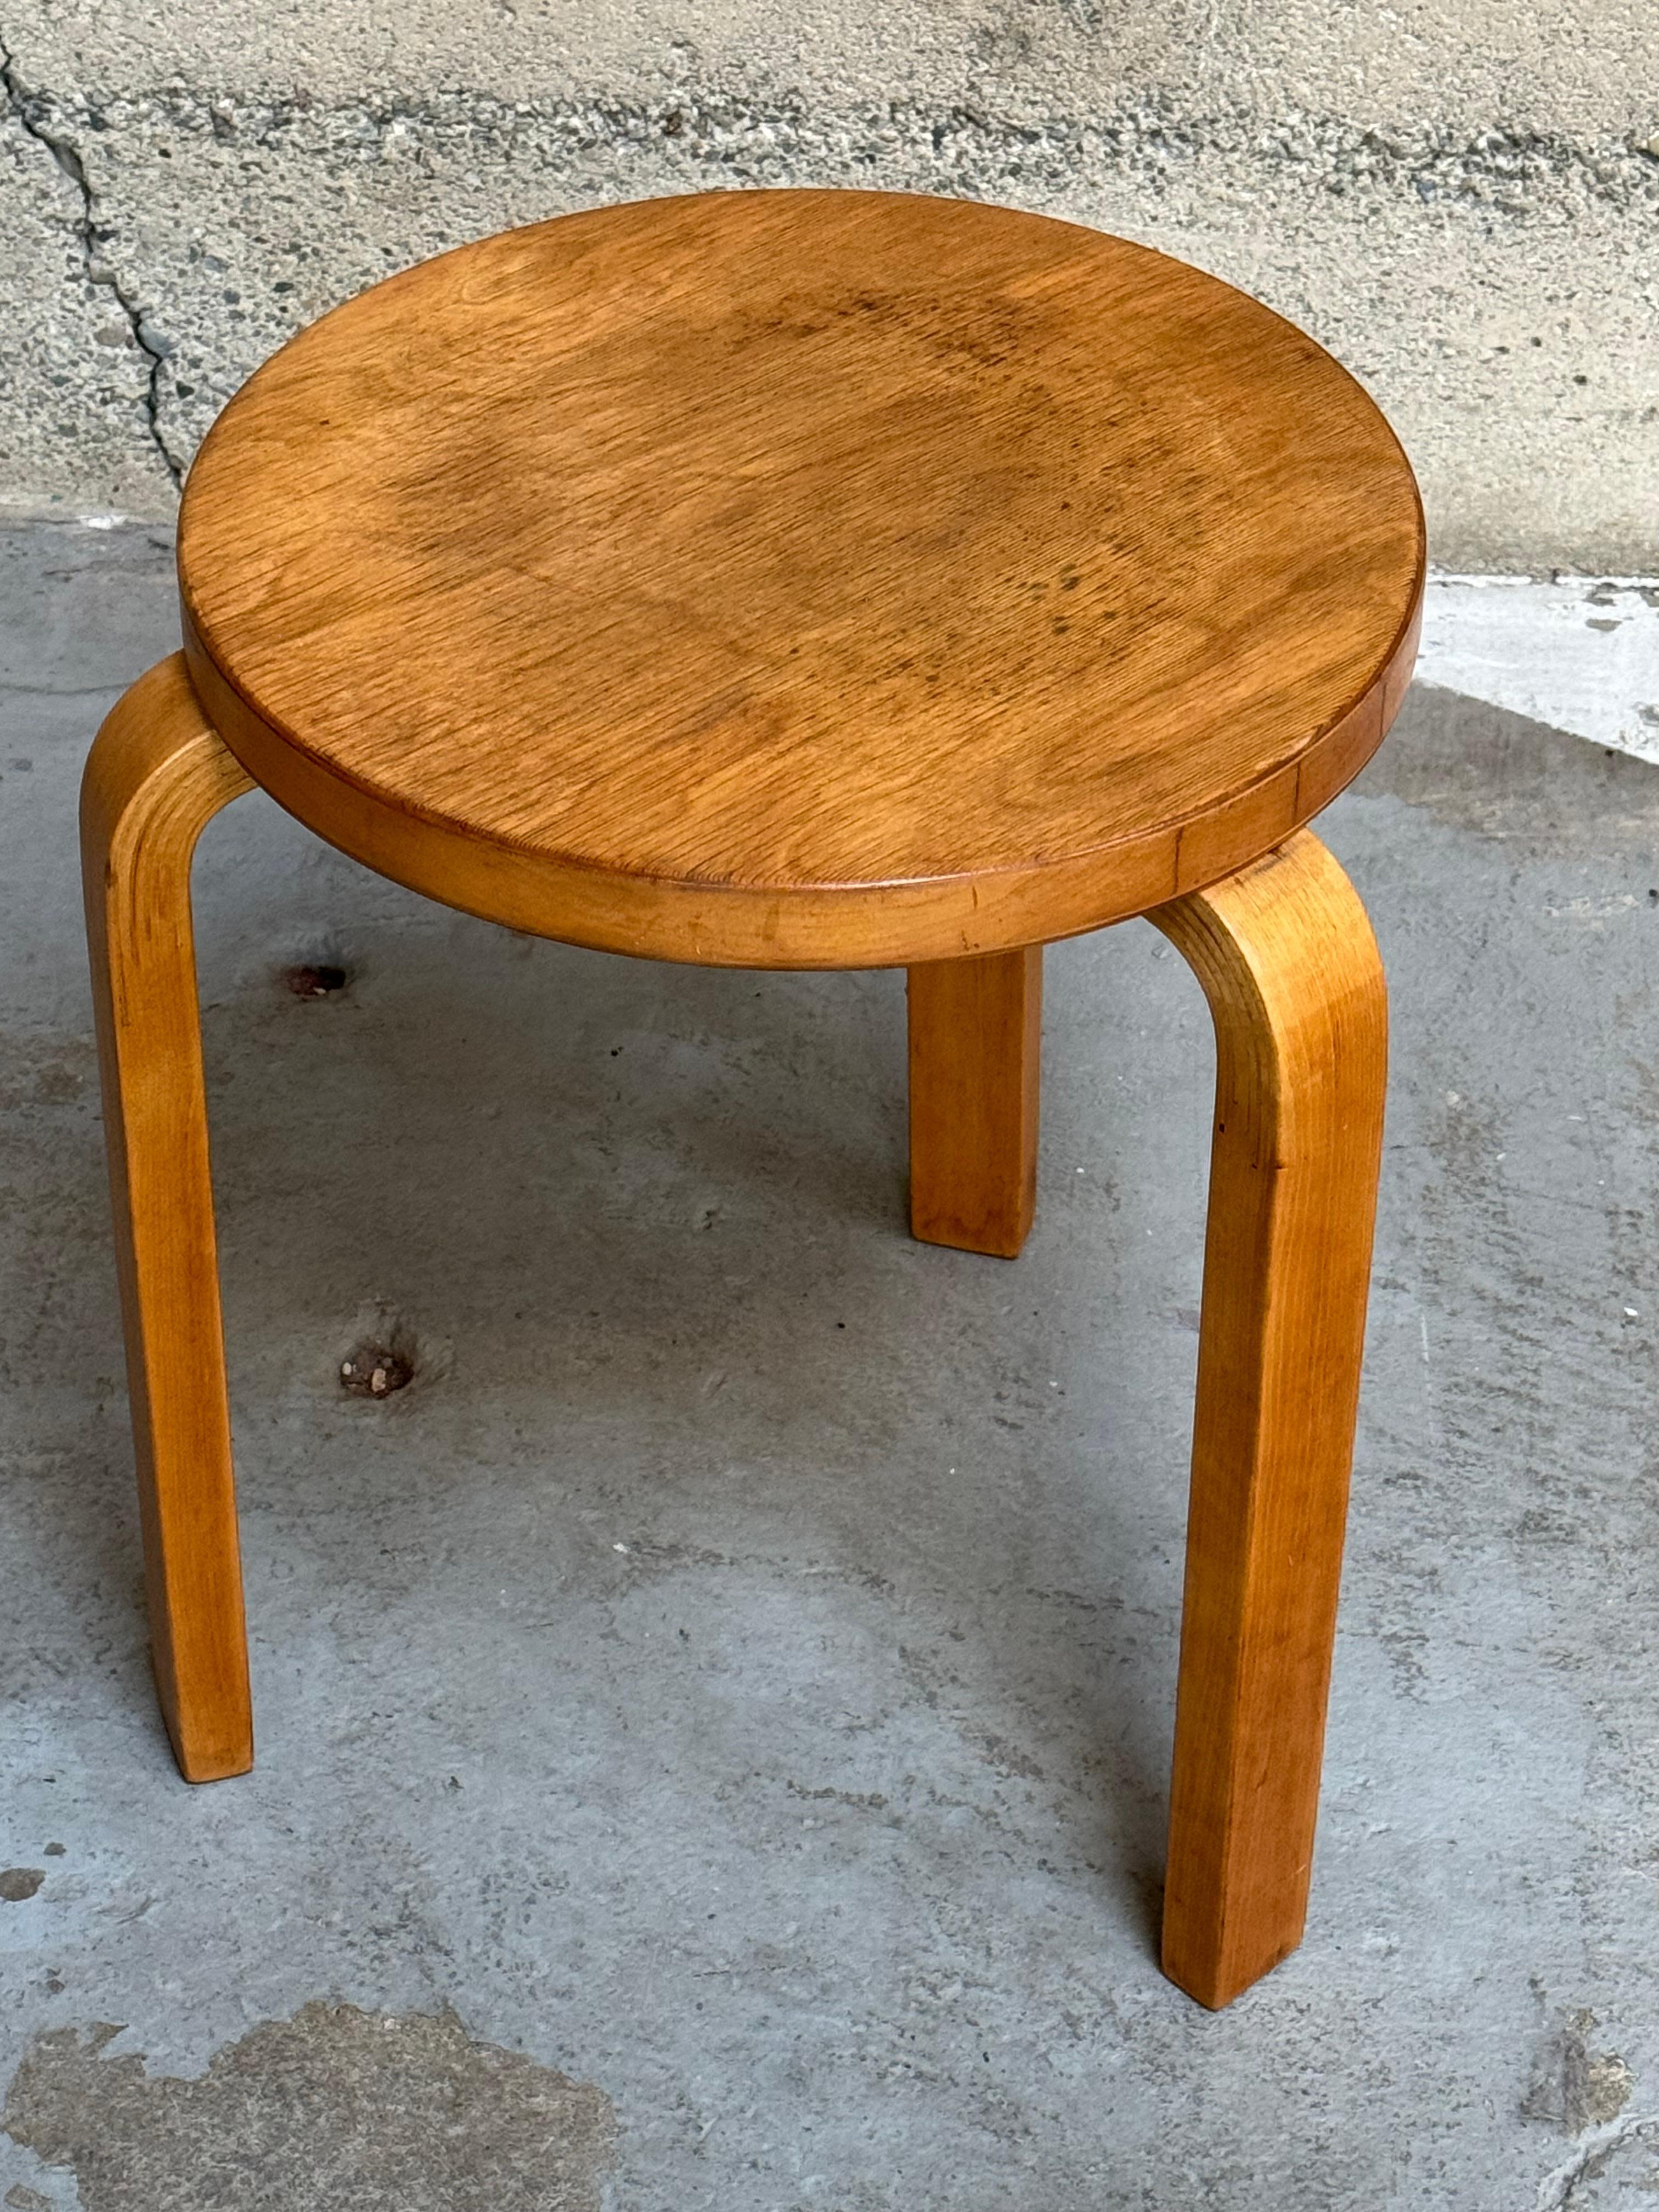 Swedish production Finsven late 1940s Alvar Aalto stool, a pre Artek production piece. The stool has developed a patina over the years which adds to its character.